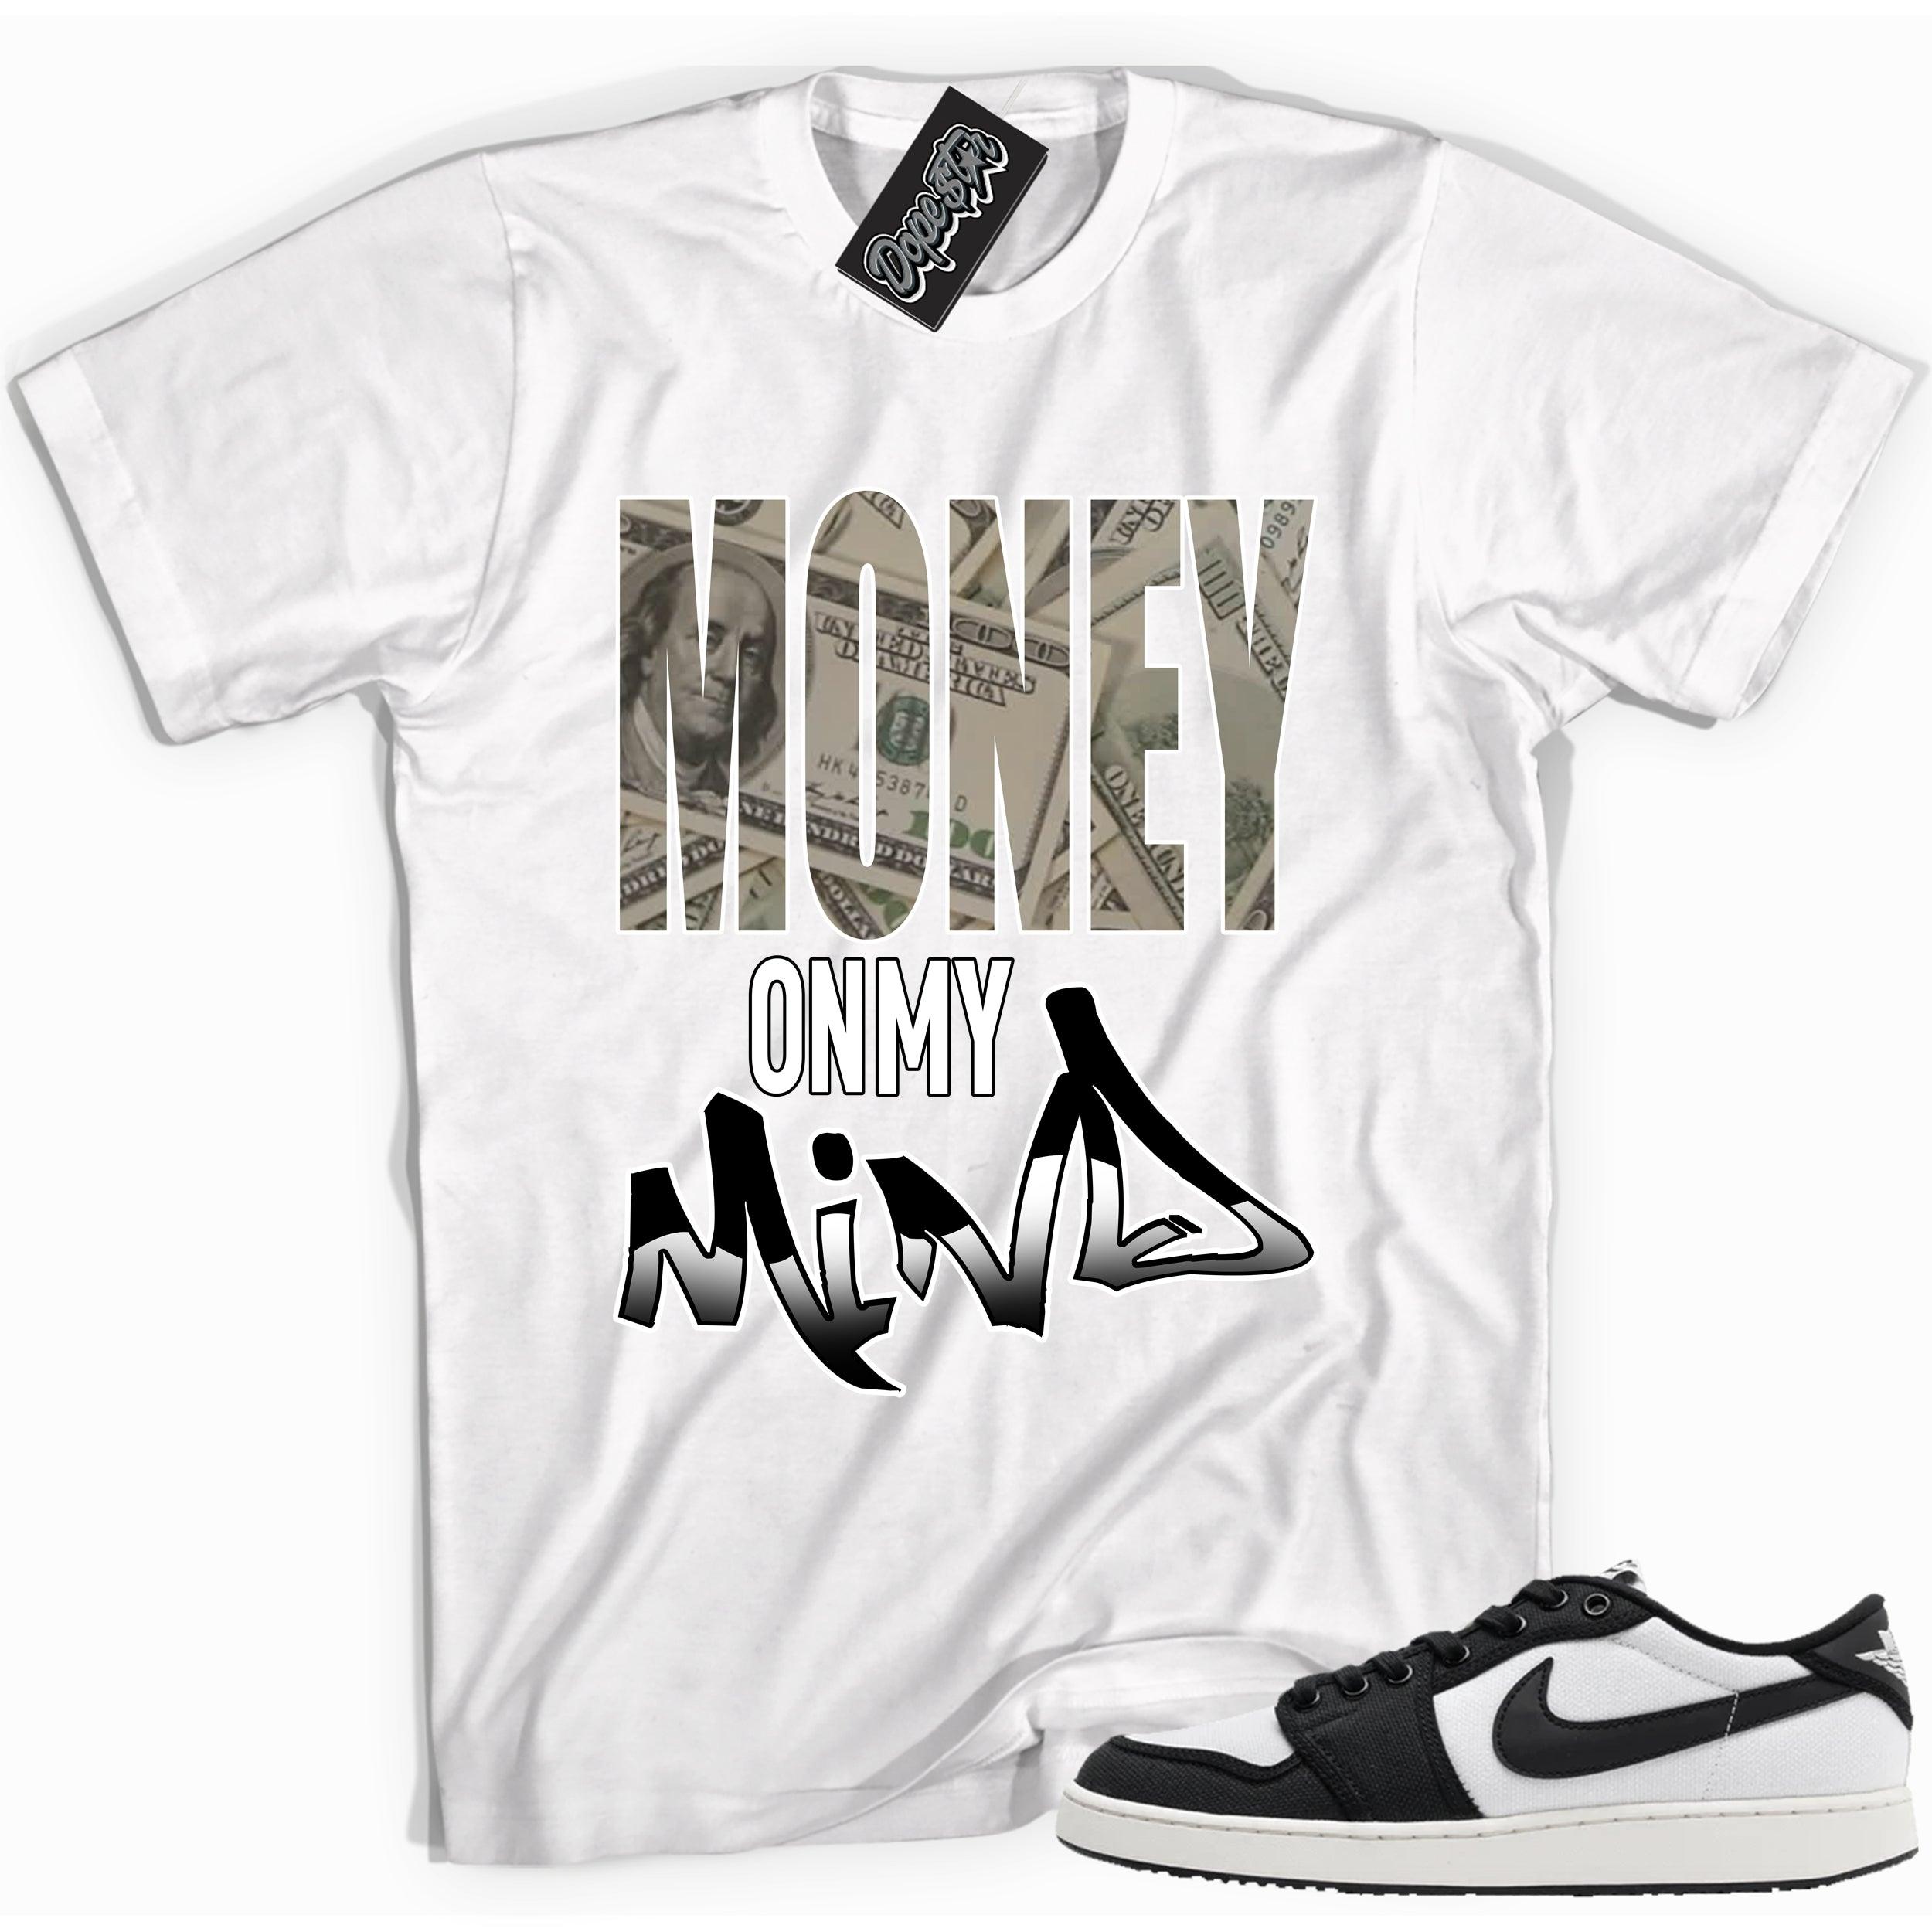 Cool white graphic tee with 'money on my mind' print, that perfectly matches Air Jordan 1 Retro Ajko Low Black & White sneakers.